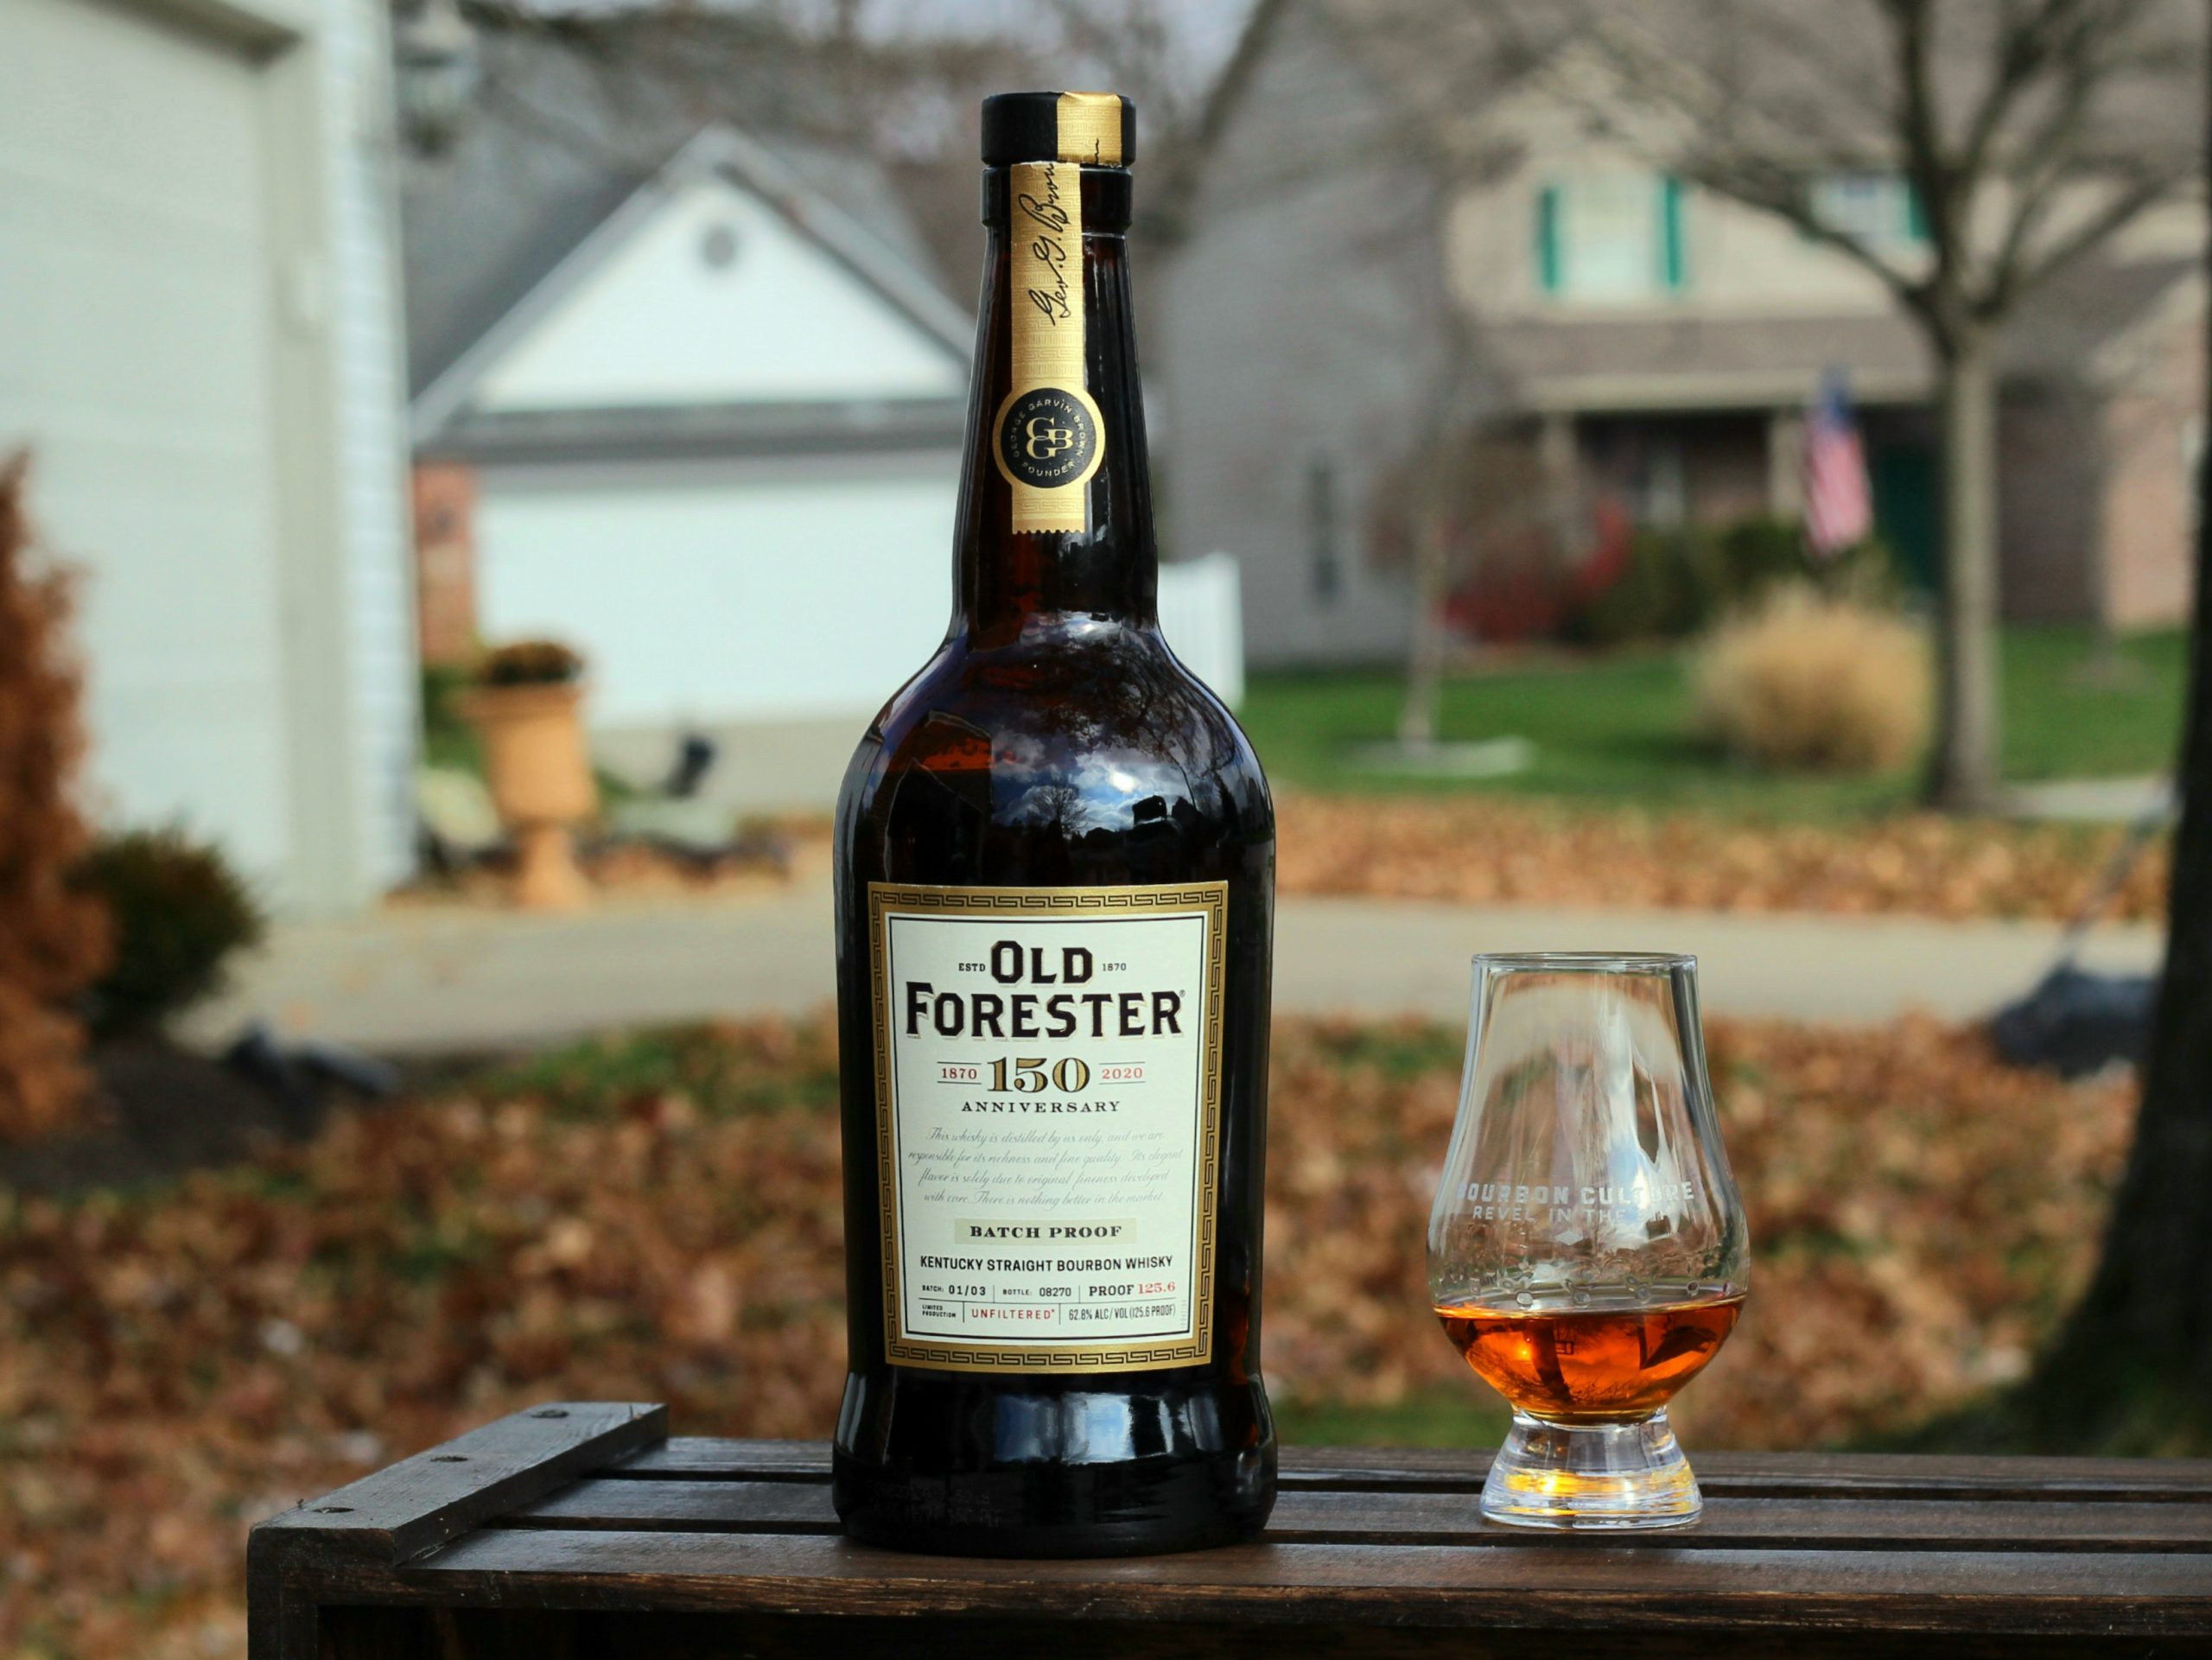 Old Forester 150th Anniversary Bourbon (Batch 1) Review